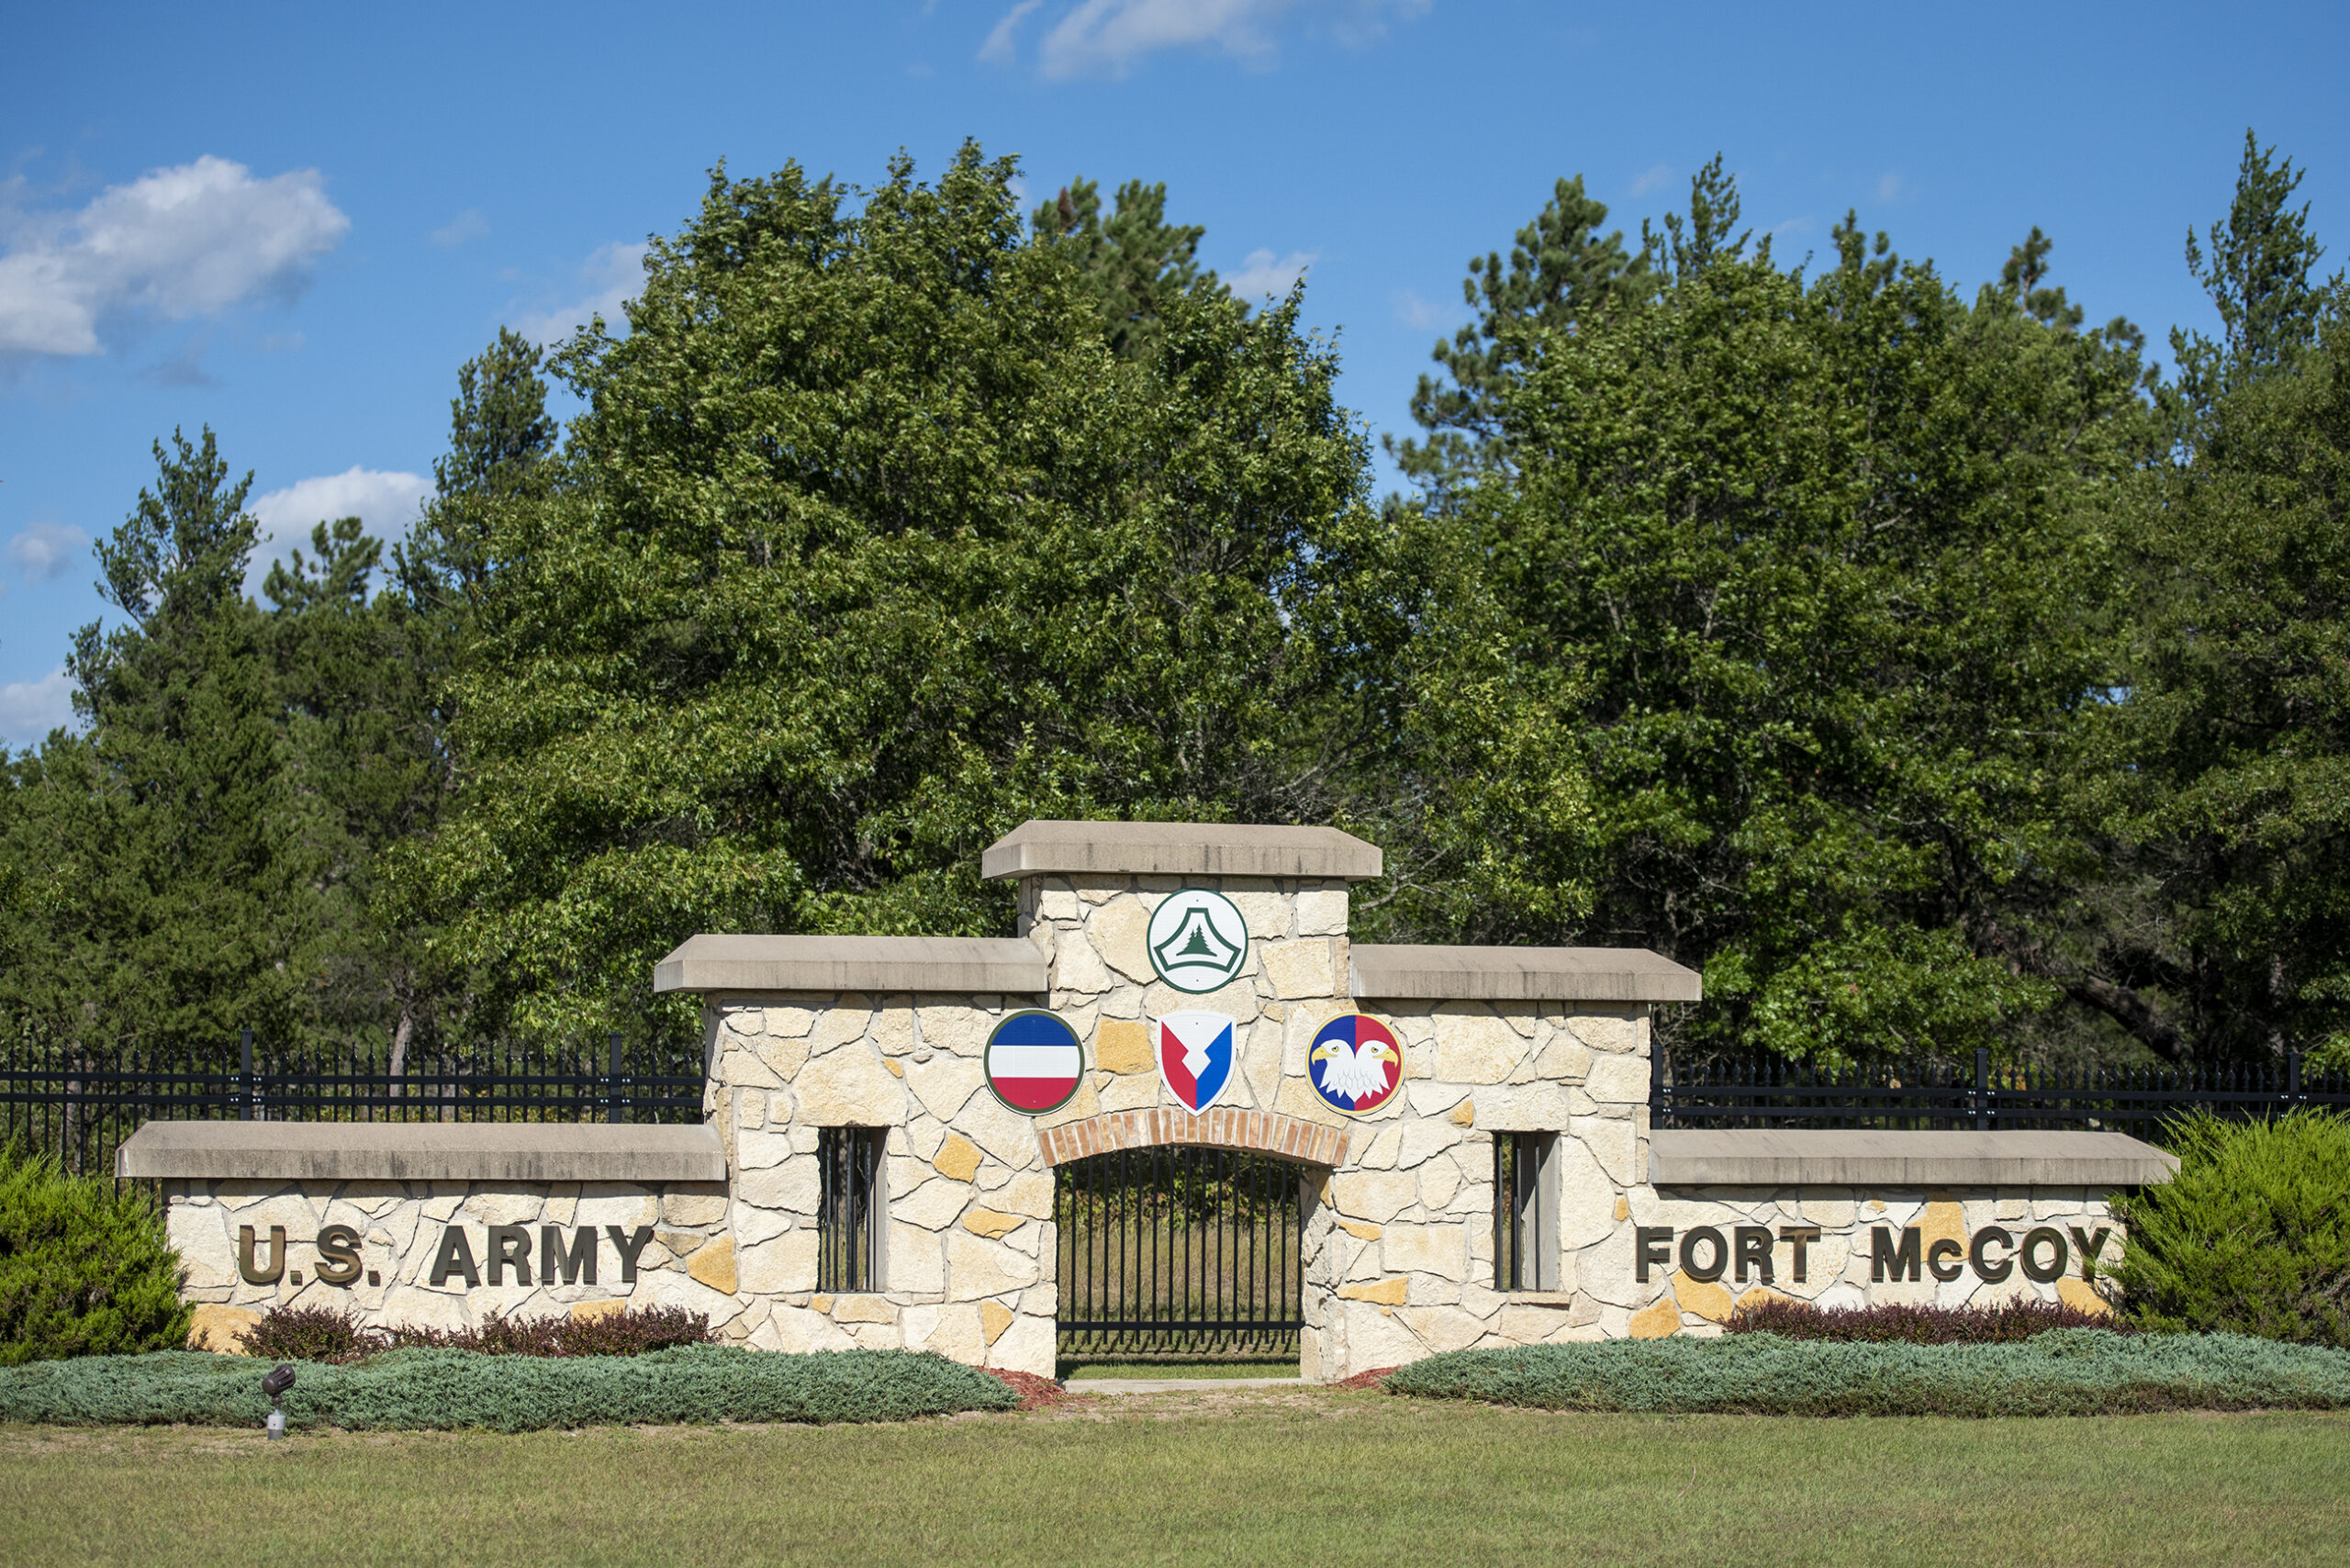 A decorative sign made with tan stone says "U.S. Army, Fort McCoy"